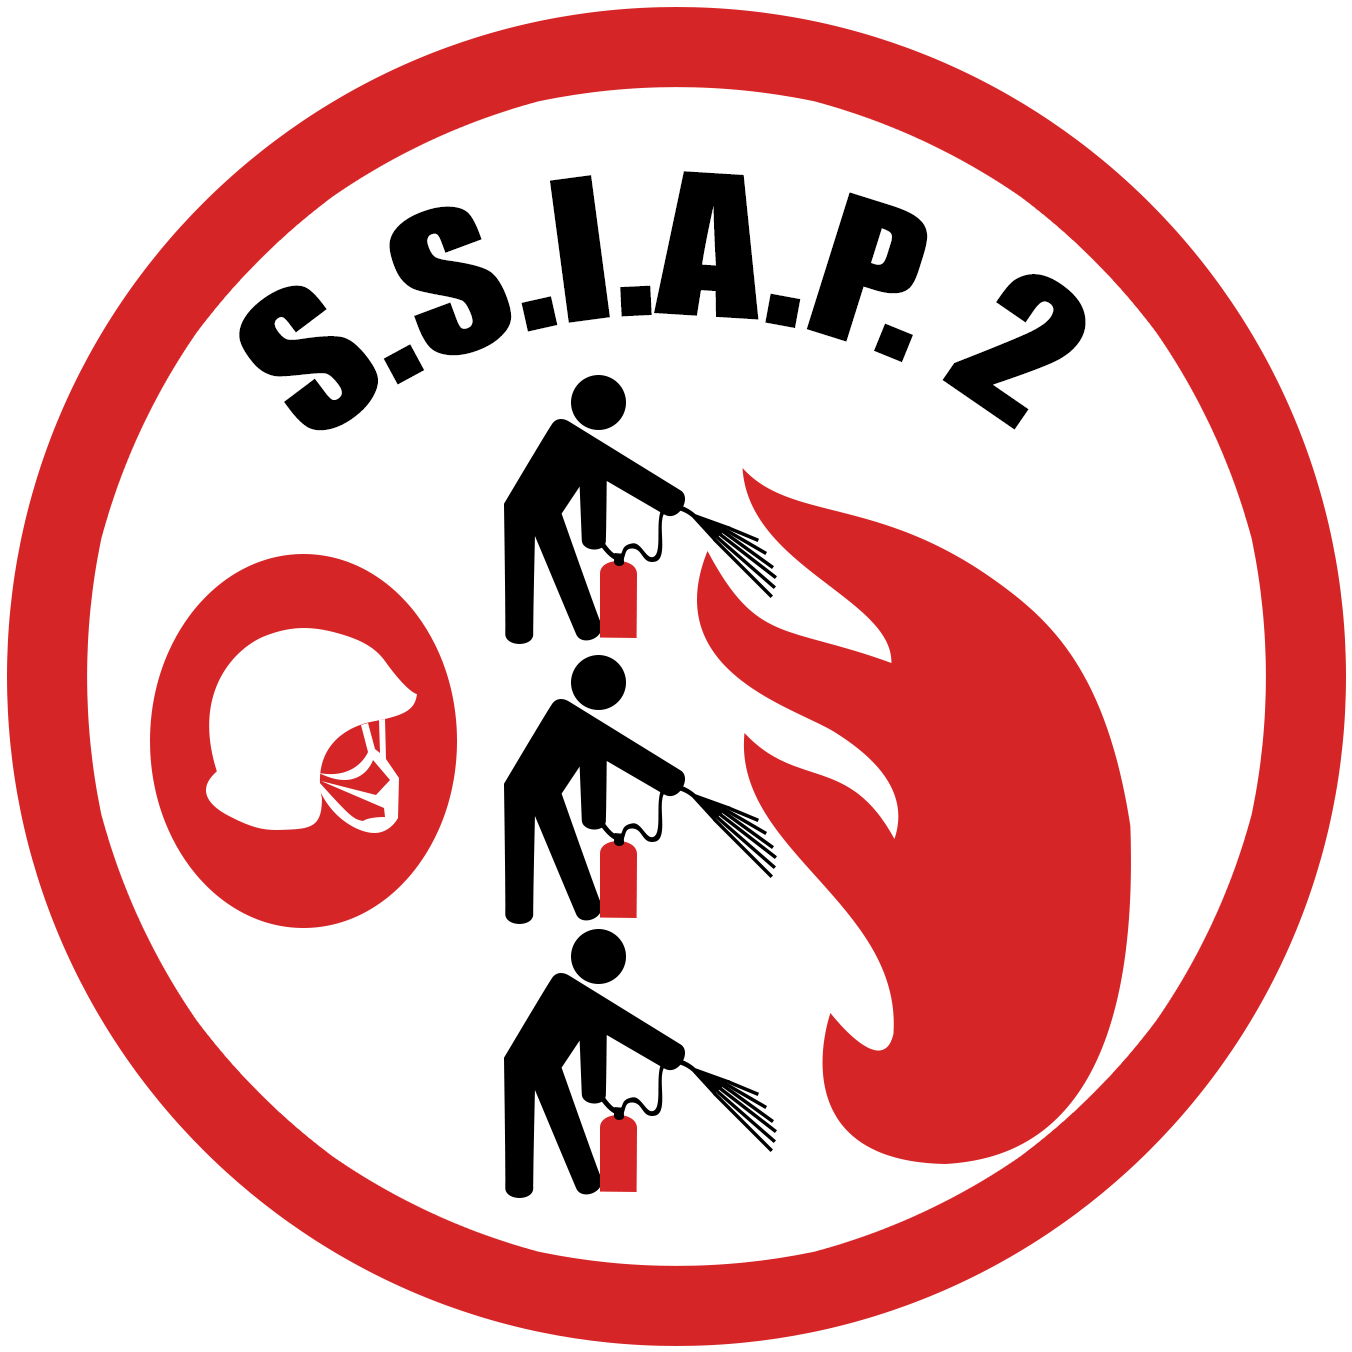 logo-formation-ssiap2.png